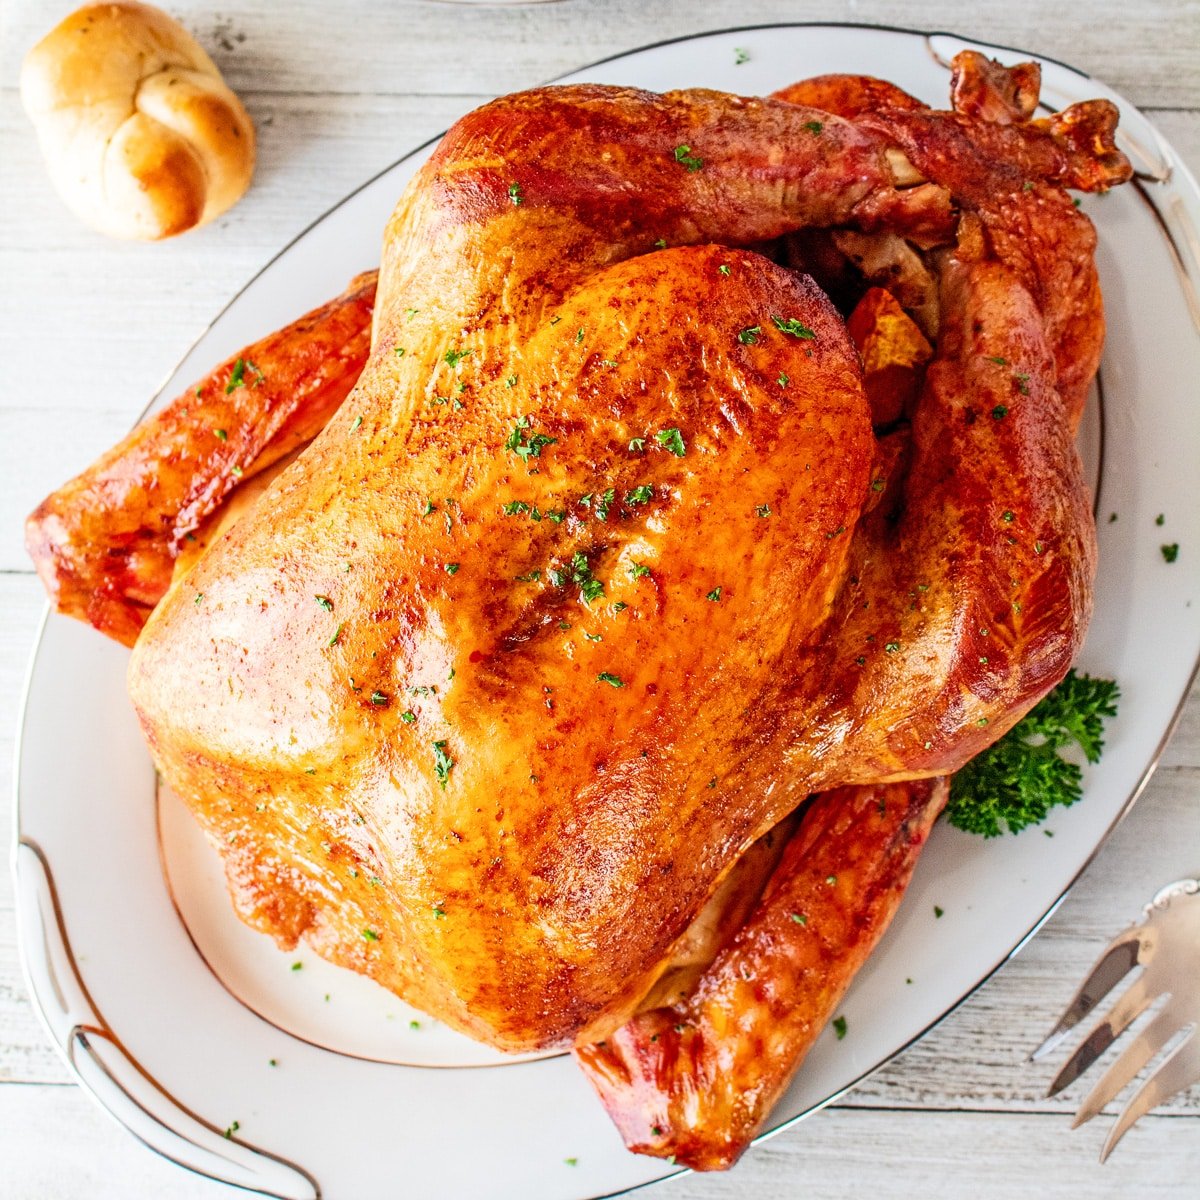 Easy Oven Roasted Turkey Recipe To Make - Bake It With Love